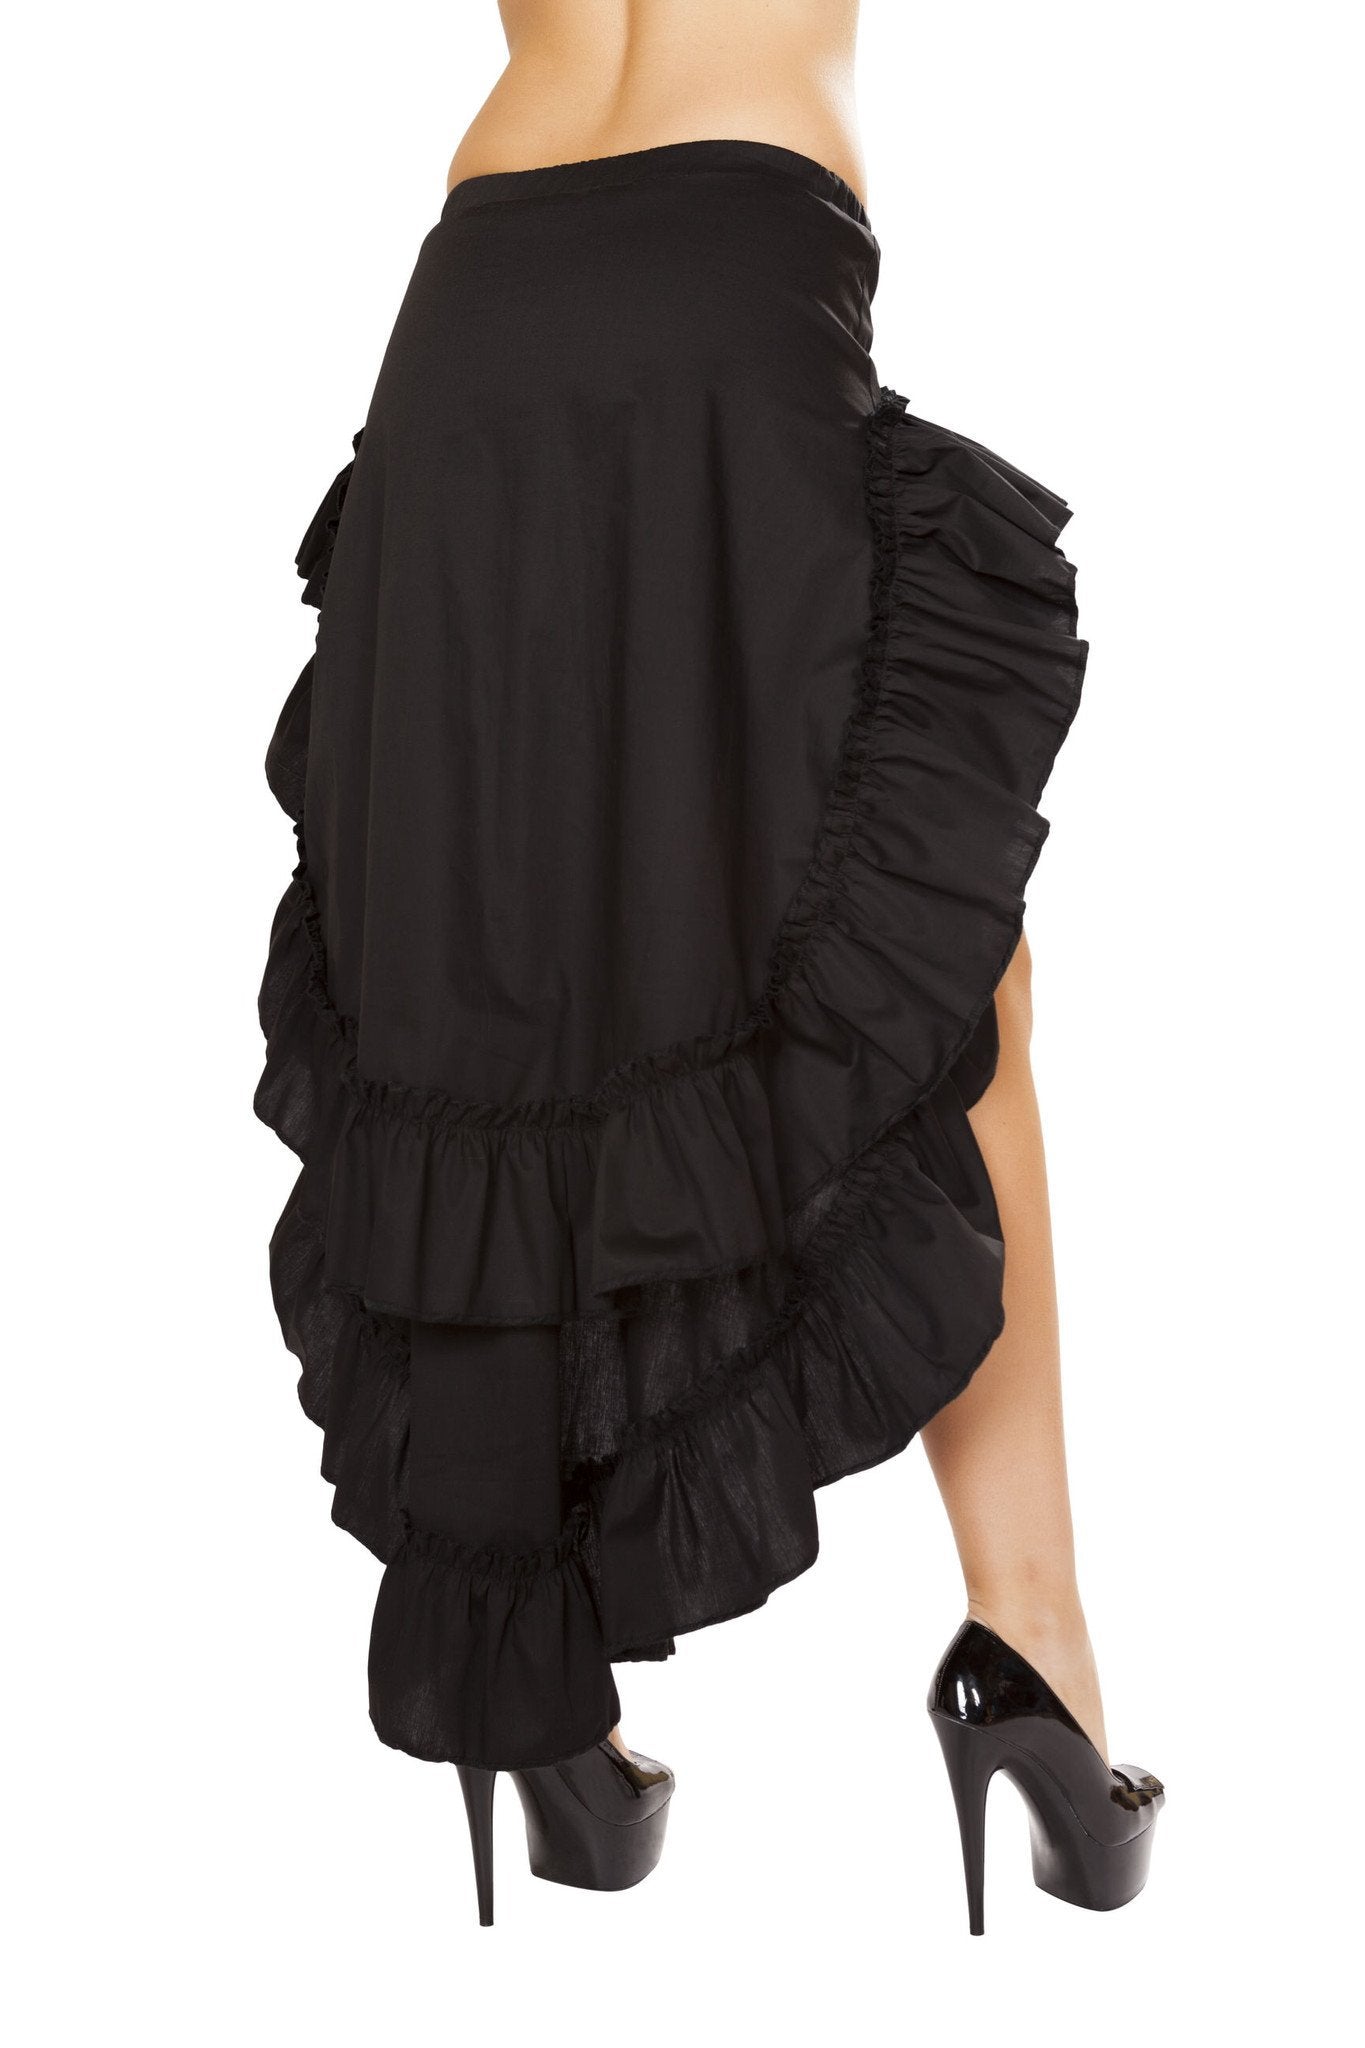 Buy Tiered Ruffle Skirt from RomaRetailShop for 39.99 with Same Day Shipping Designed by Roma Costume 4772-Blk-S